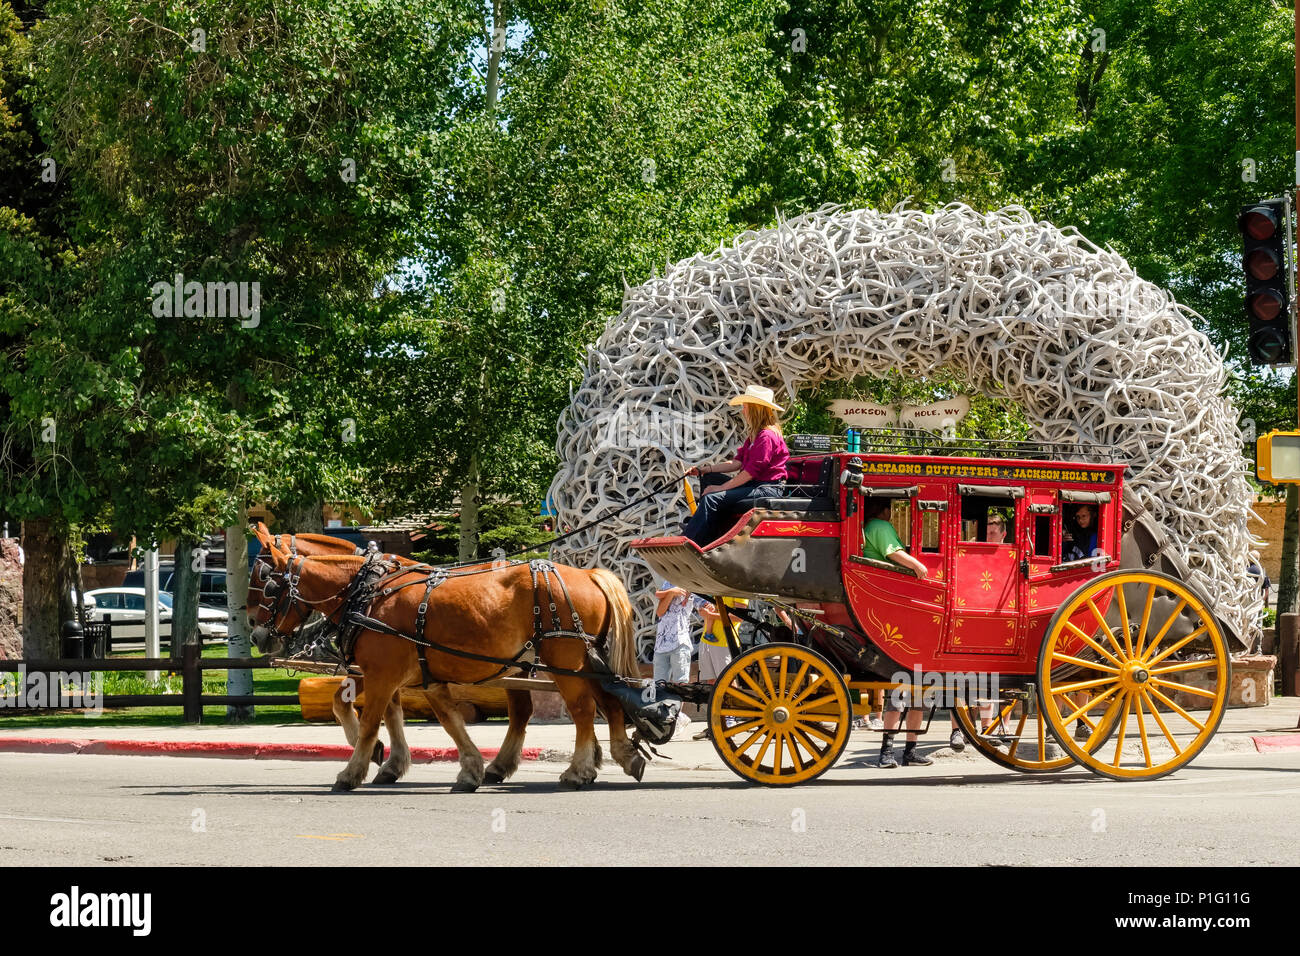 Horse drawn stagecoach typical of old American West carries tourists in Jackson Wyoming in front of iconic park entrance arch of antlers. Stock Photo